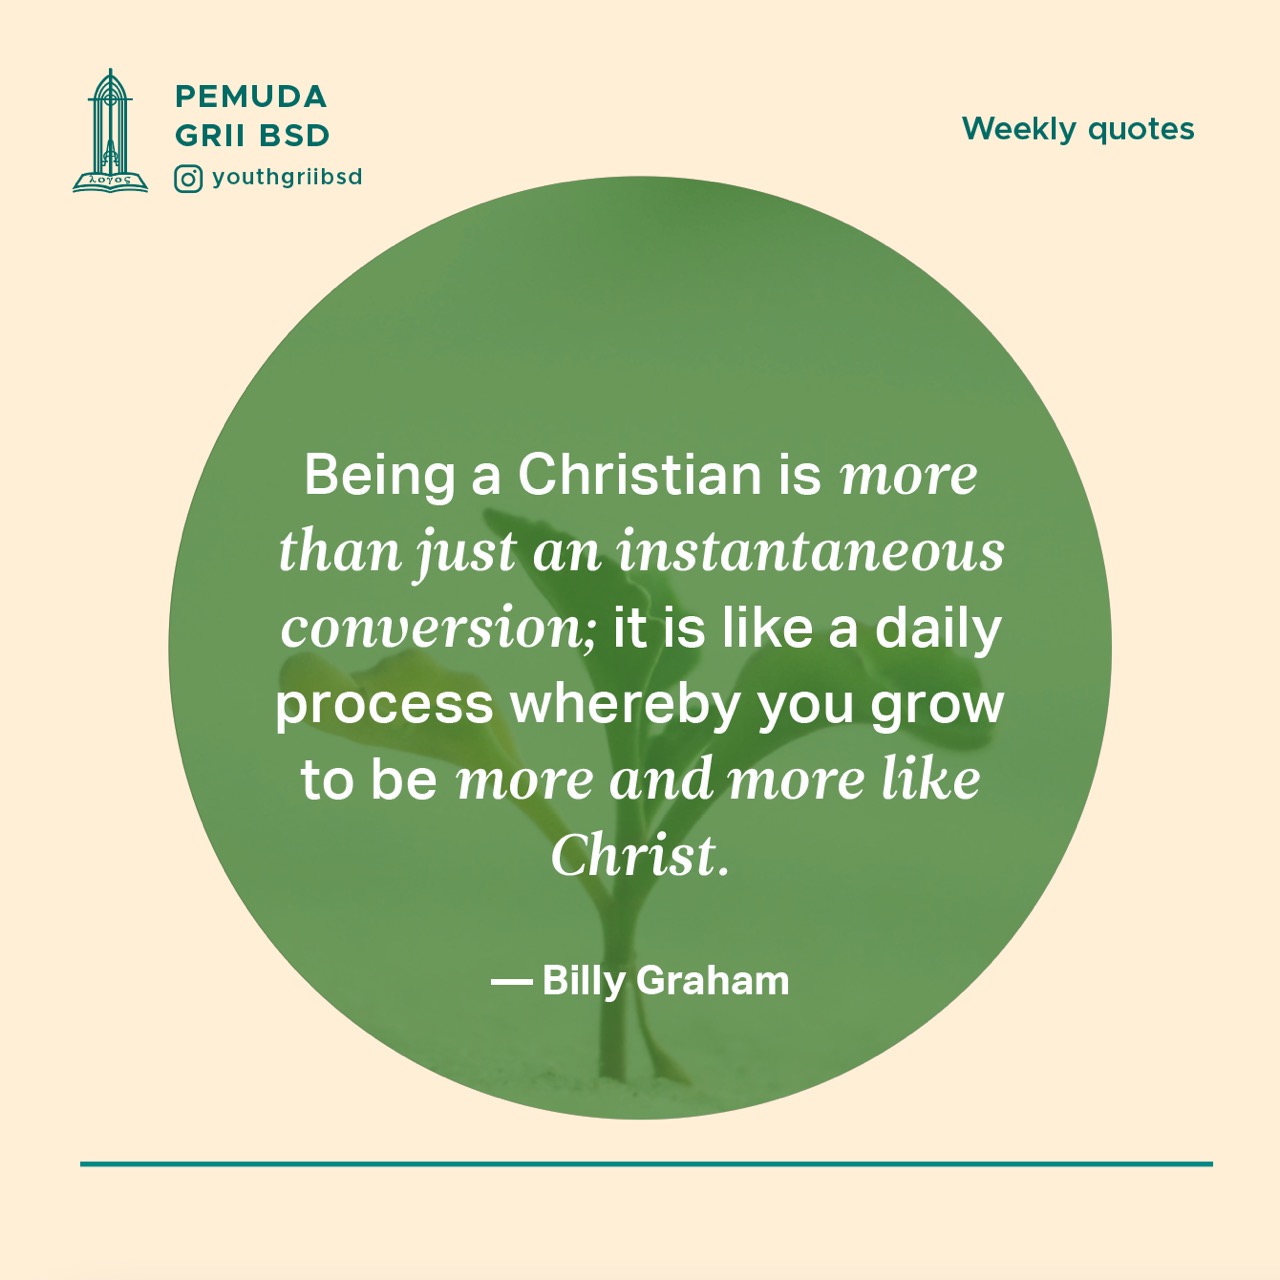 Being a Christian is more than just an instantaneous conversion; it is like a daily process whereby you grow to be more and more like Christ.